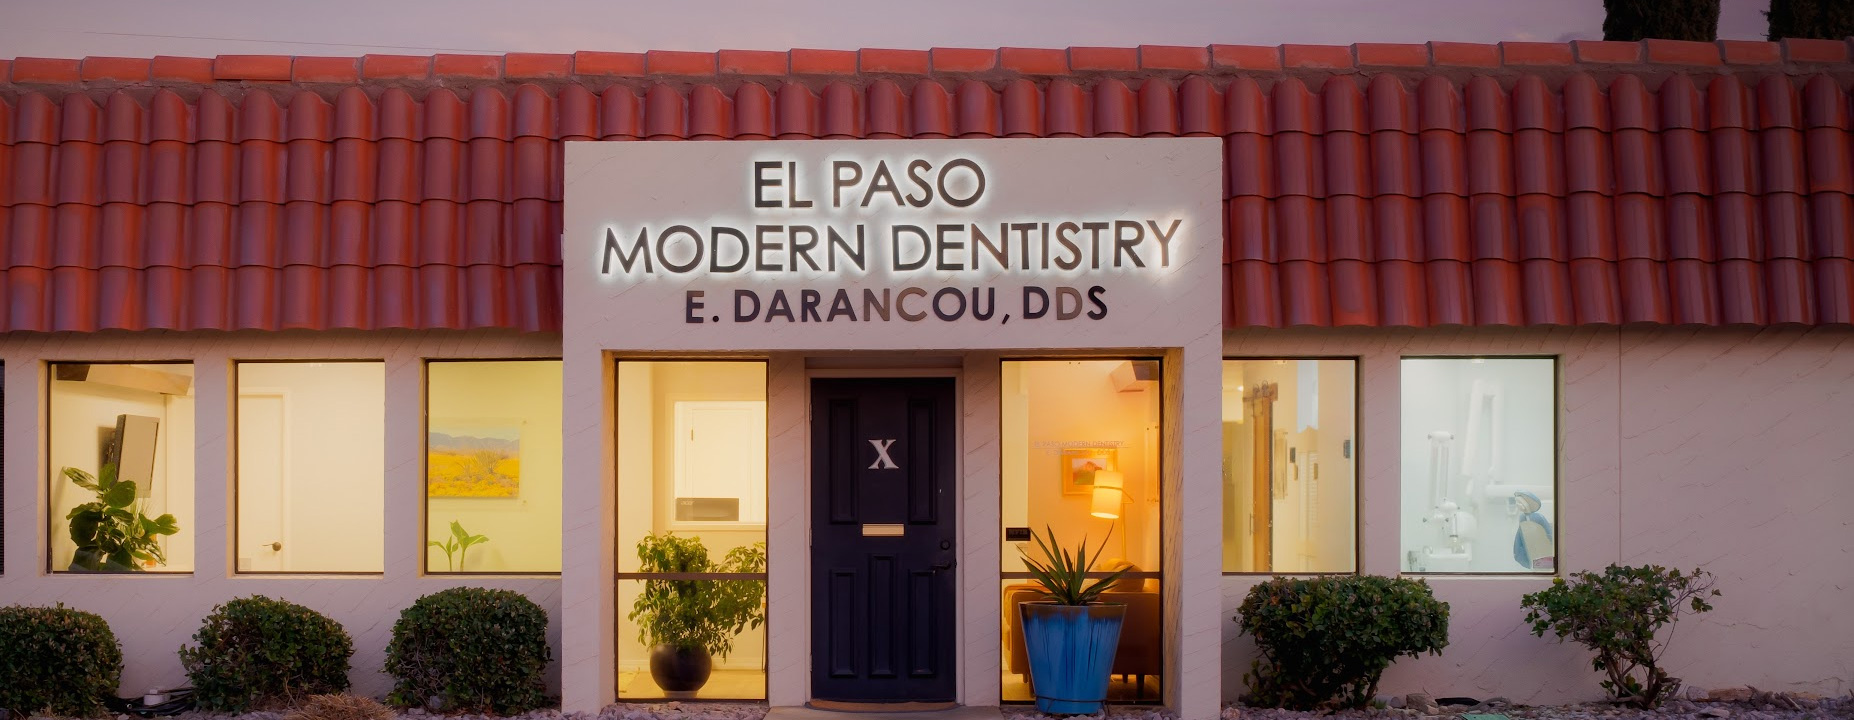 Office Tour of El Paso Modern Dentistry